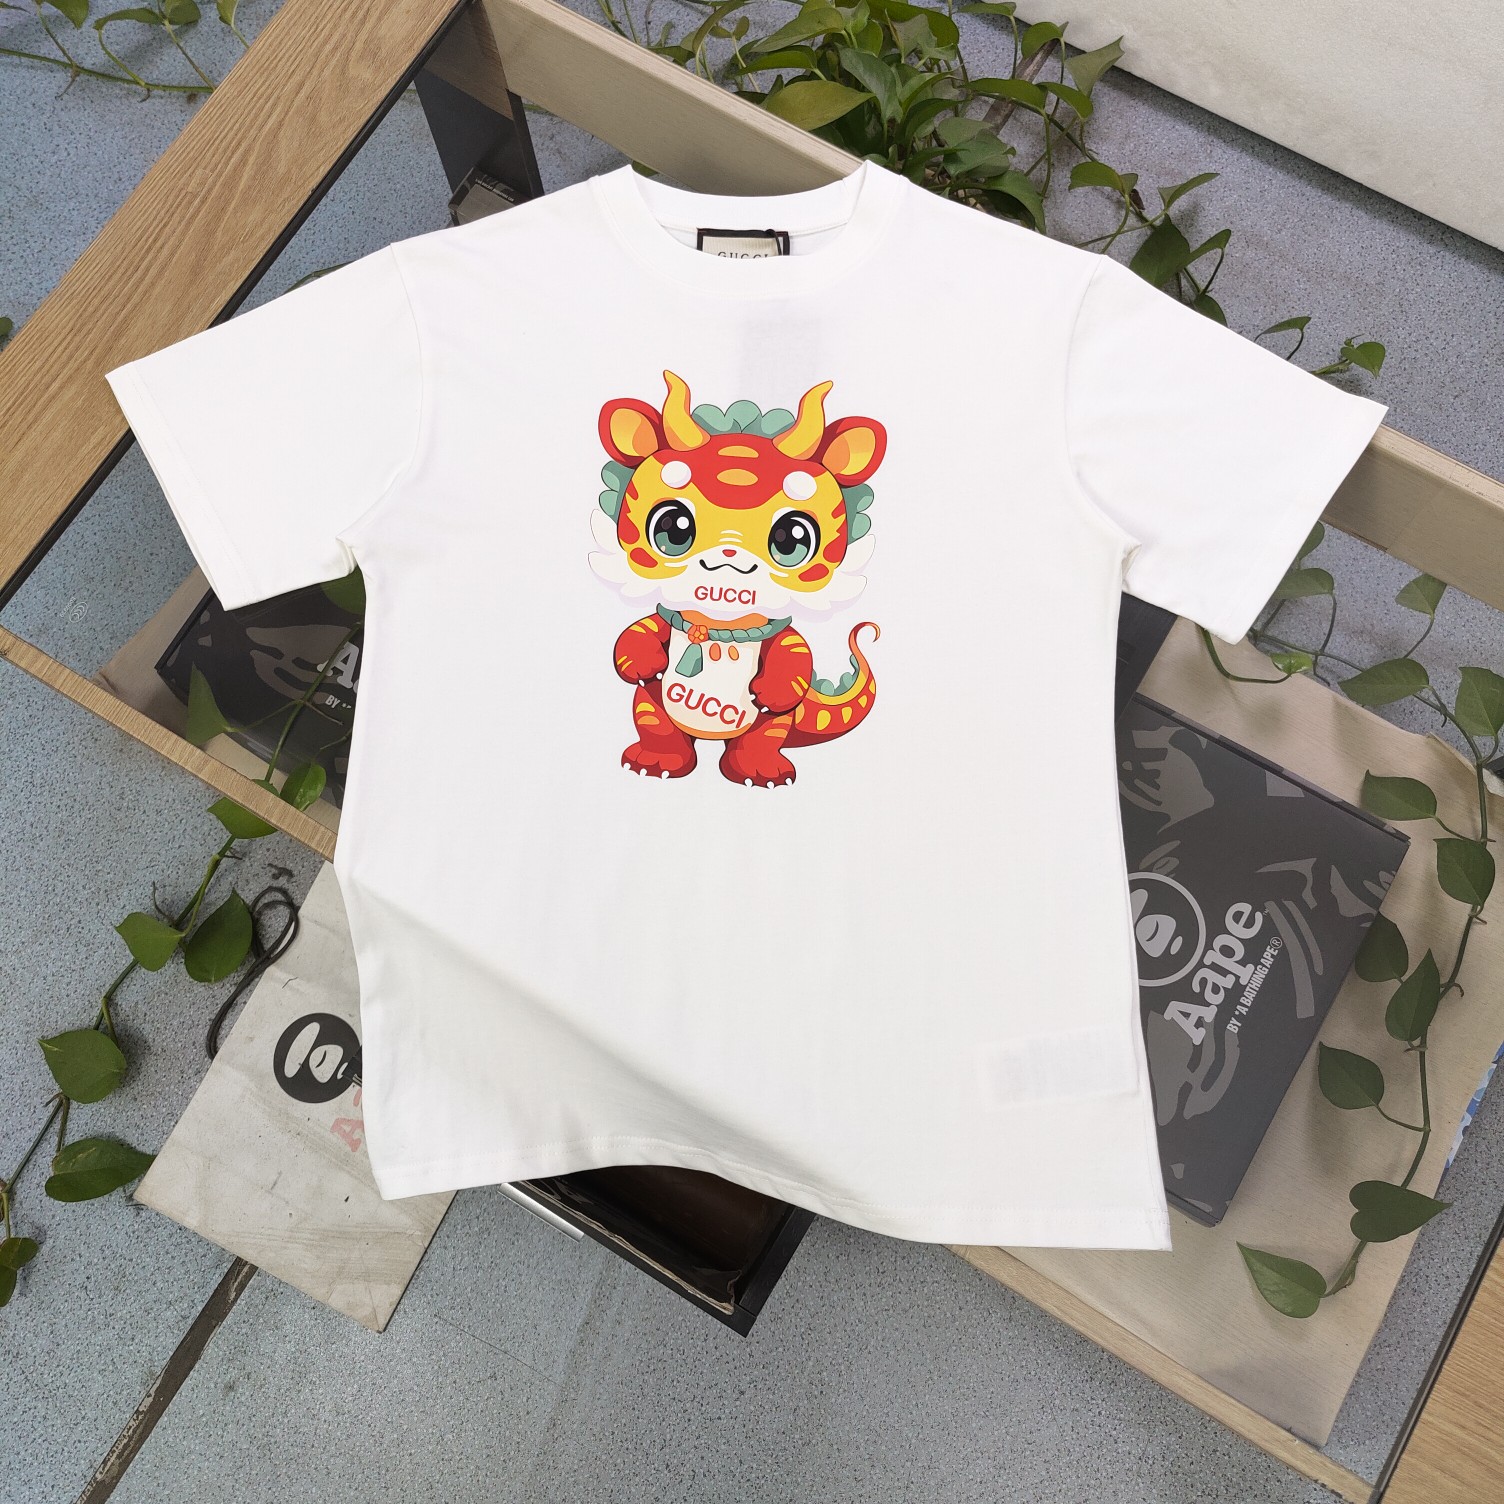 Gucci Clothing T-Shirt High Quality 1:1 Replica
 Apricot Color Black White Printing Unisex Cotton Spring/Summer Collection Short Sleeve XD99150